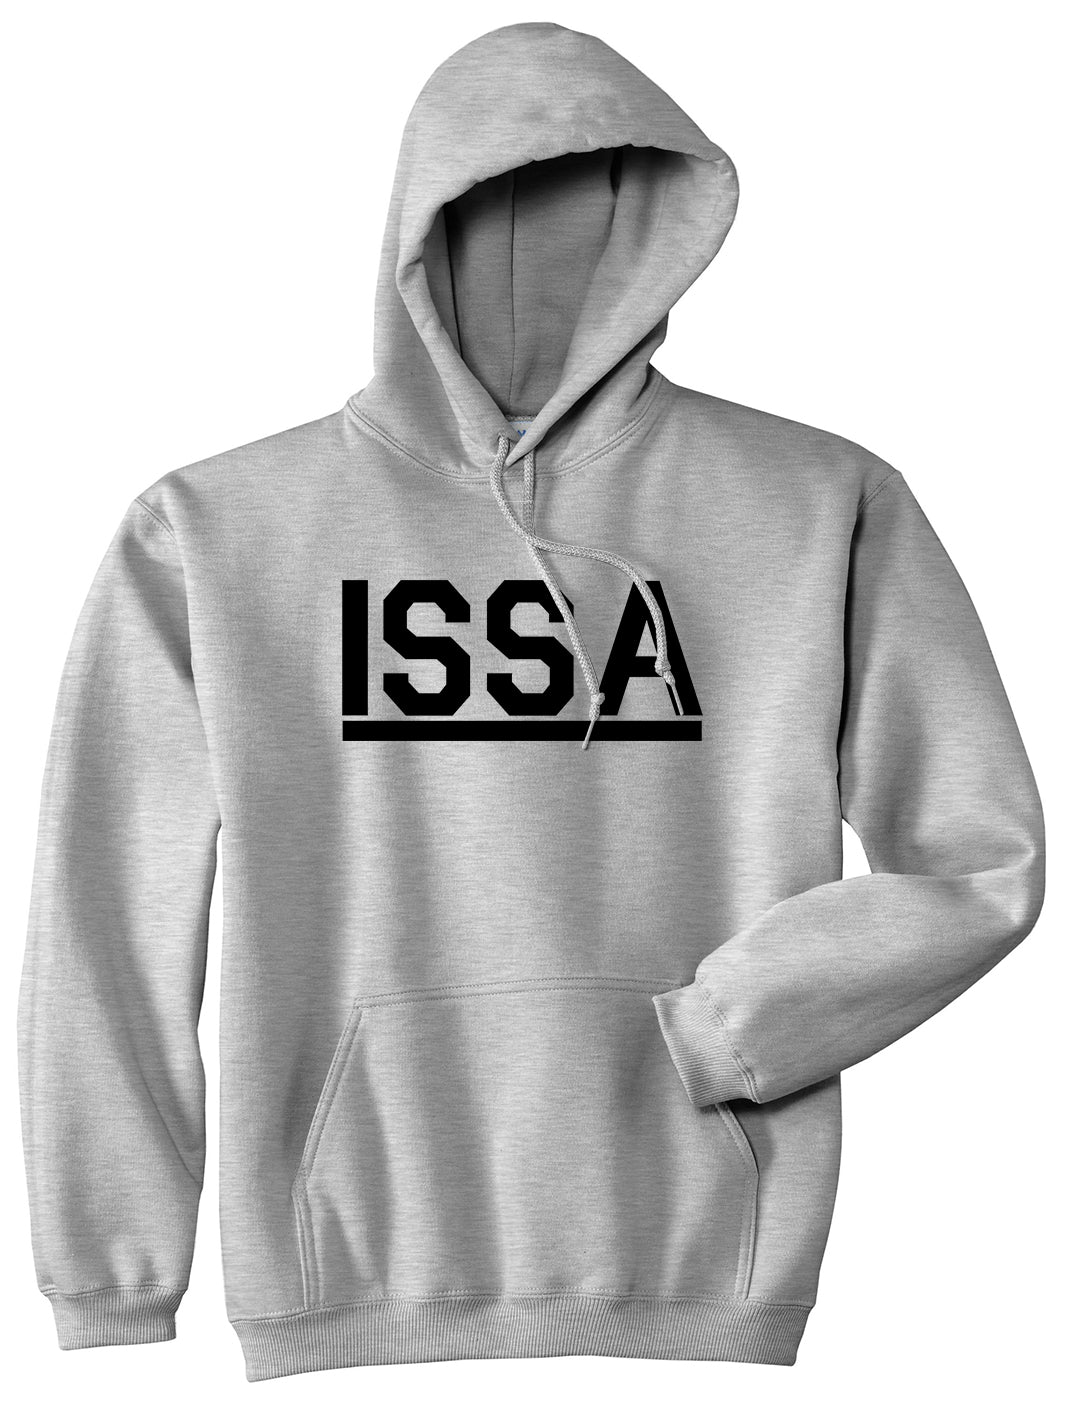 ISSA Grey Pullover Hoodie by Kings Of NY